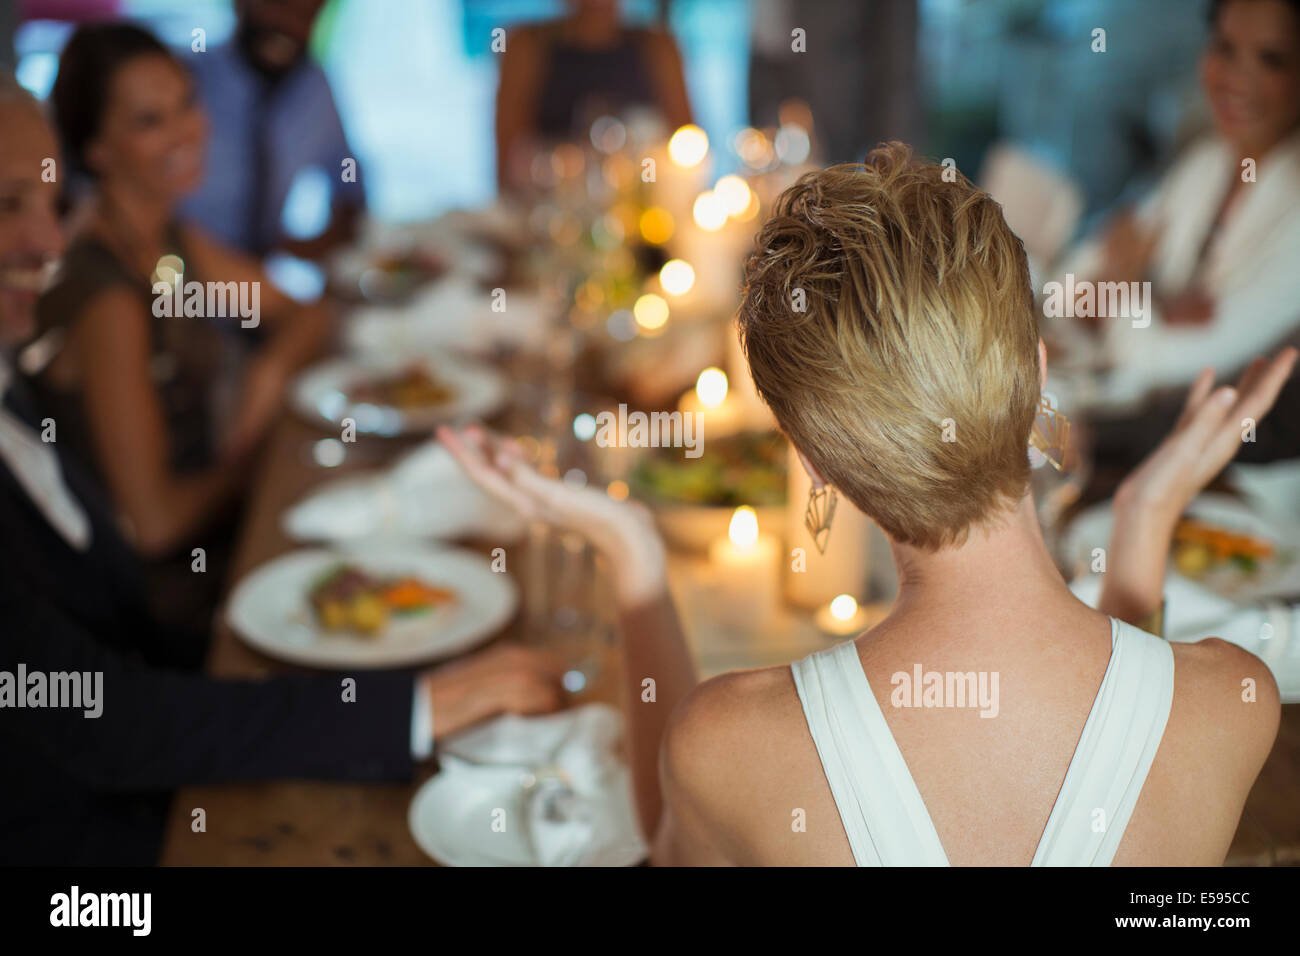 Woman clapping at dinner party Banque D'Images